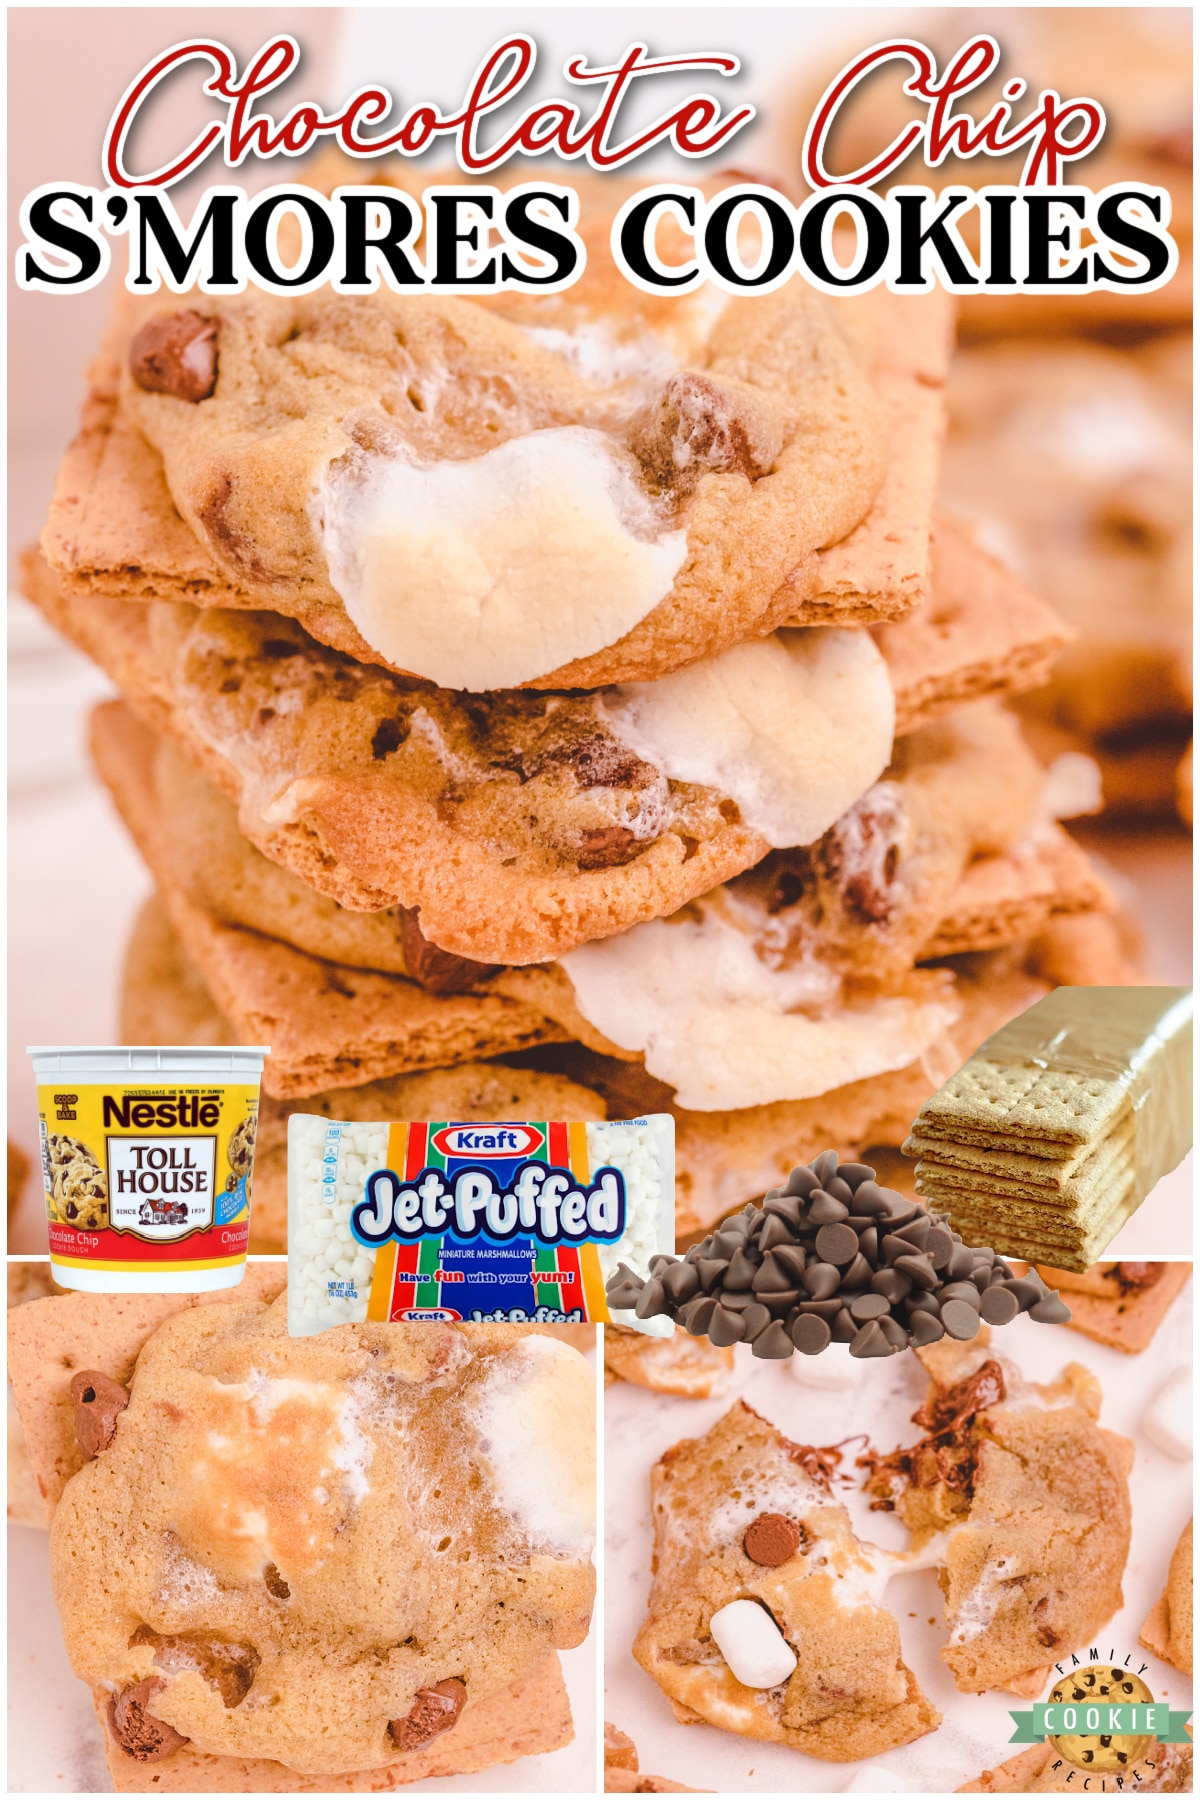 Chocolate Chip S’mores Cookies are soft, chewy chocolate chip cookies baked atop a graham cracker, then topped with chocolate chips & marshmallows! 